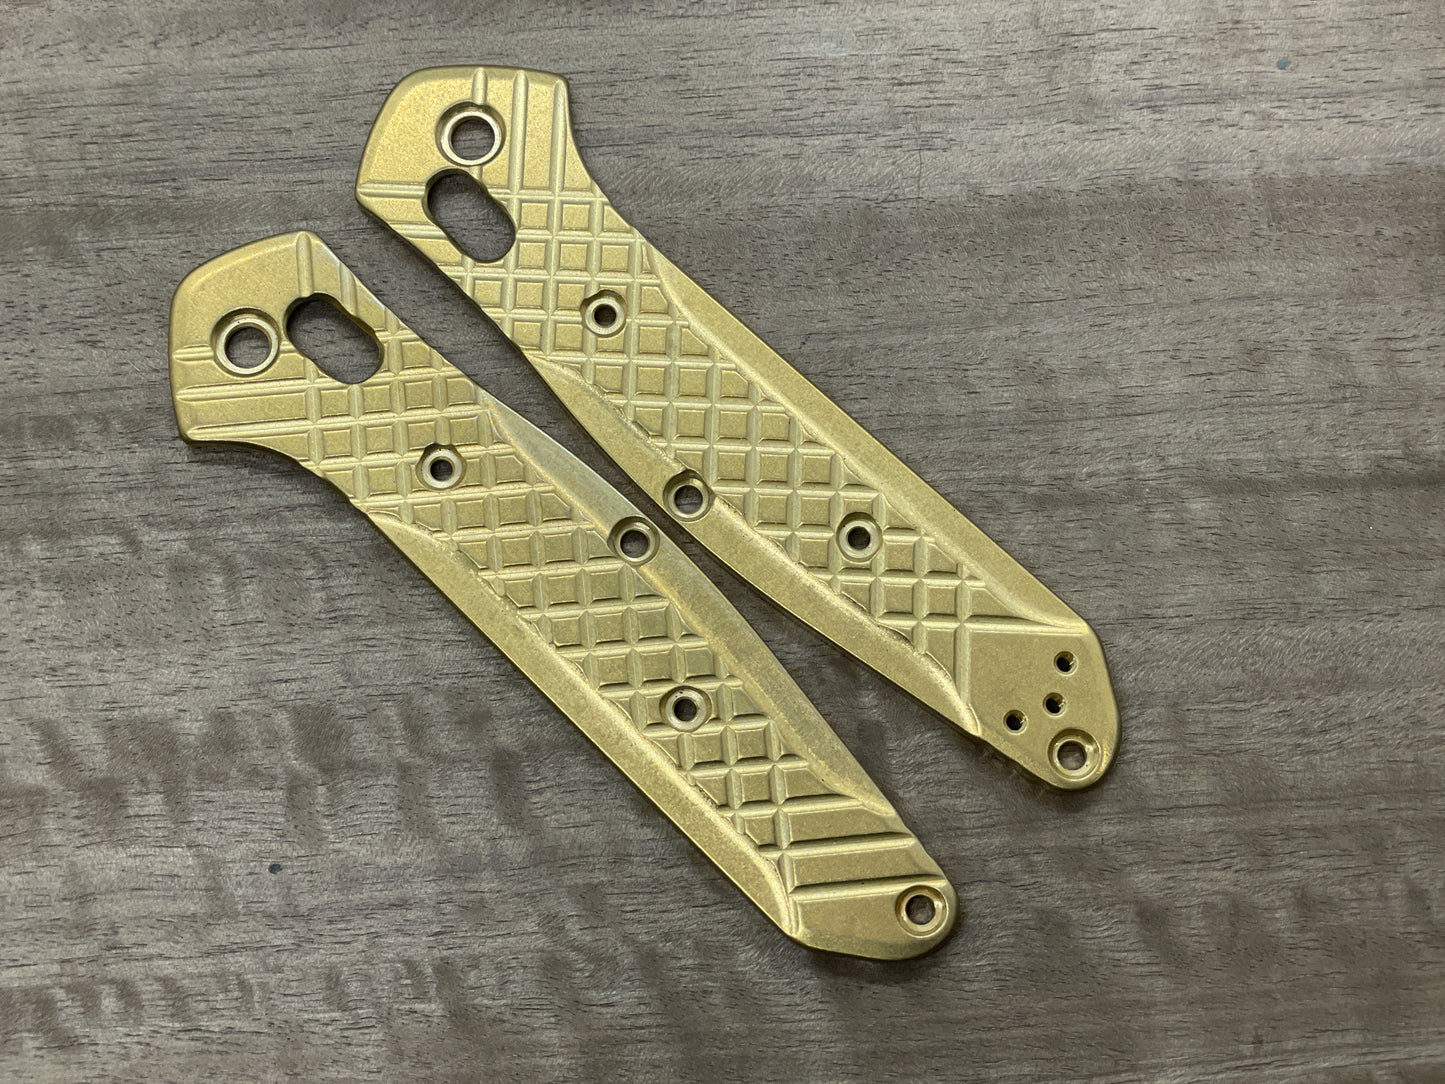 Tumbled Brushed FRAG milled Brass Scales for Benchmade 940 Osborne